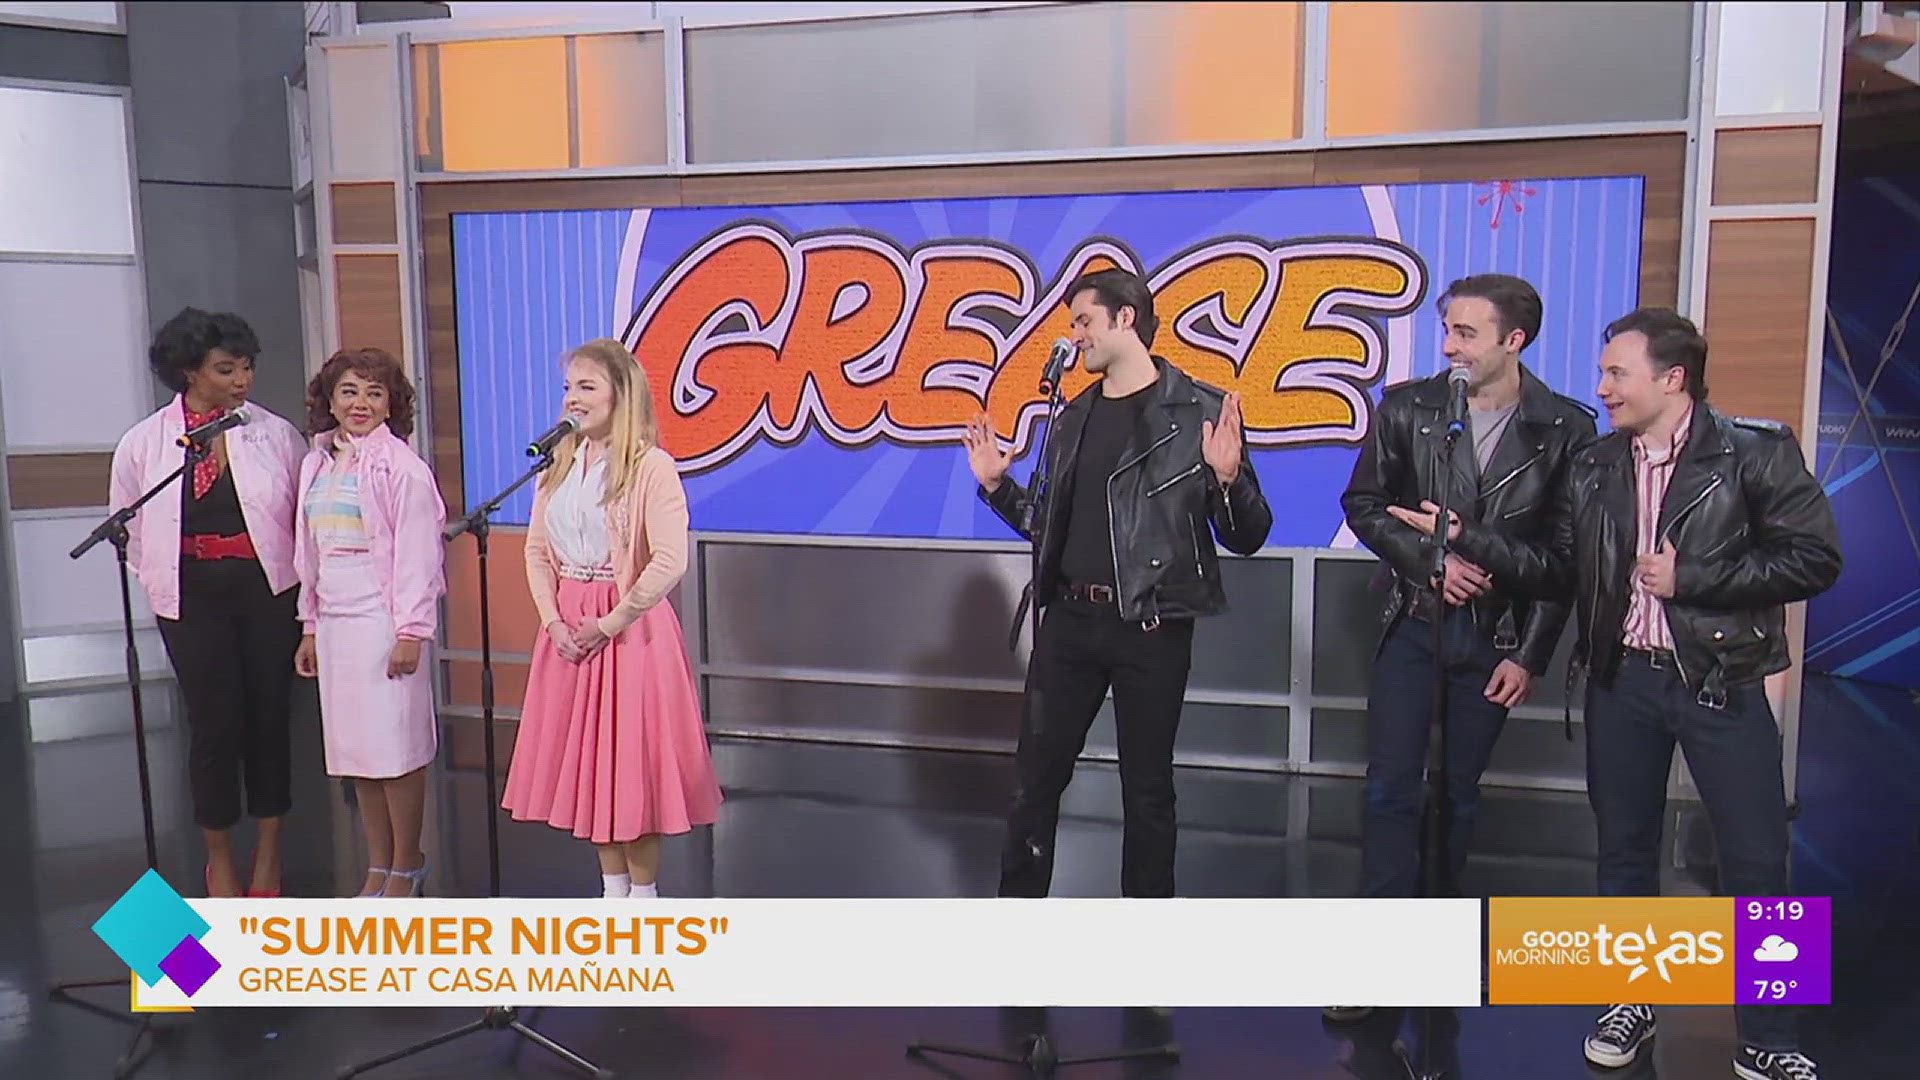 Everyone’s favorite rock-and-roll musical is back at Casa Mañana! Some of the cast members joined GMT for a special performance ahead of the show.